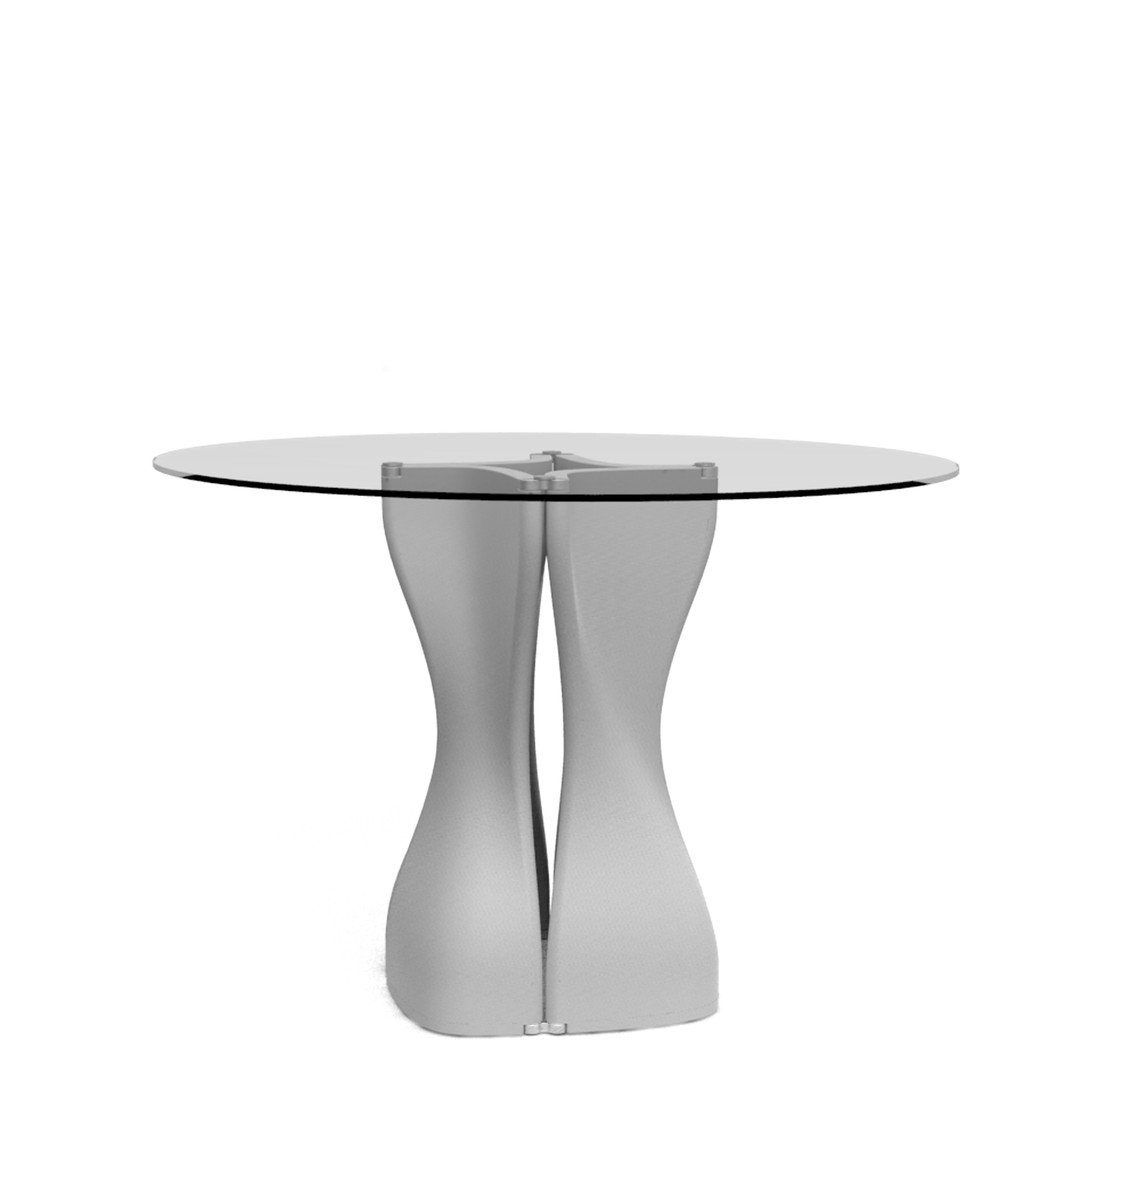 Mac's Table dining from Tonon, designed by Mac Stopa